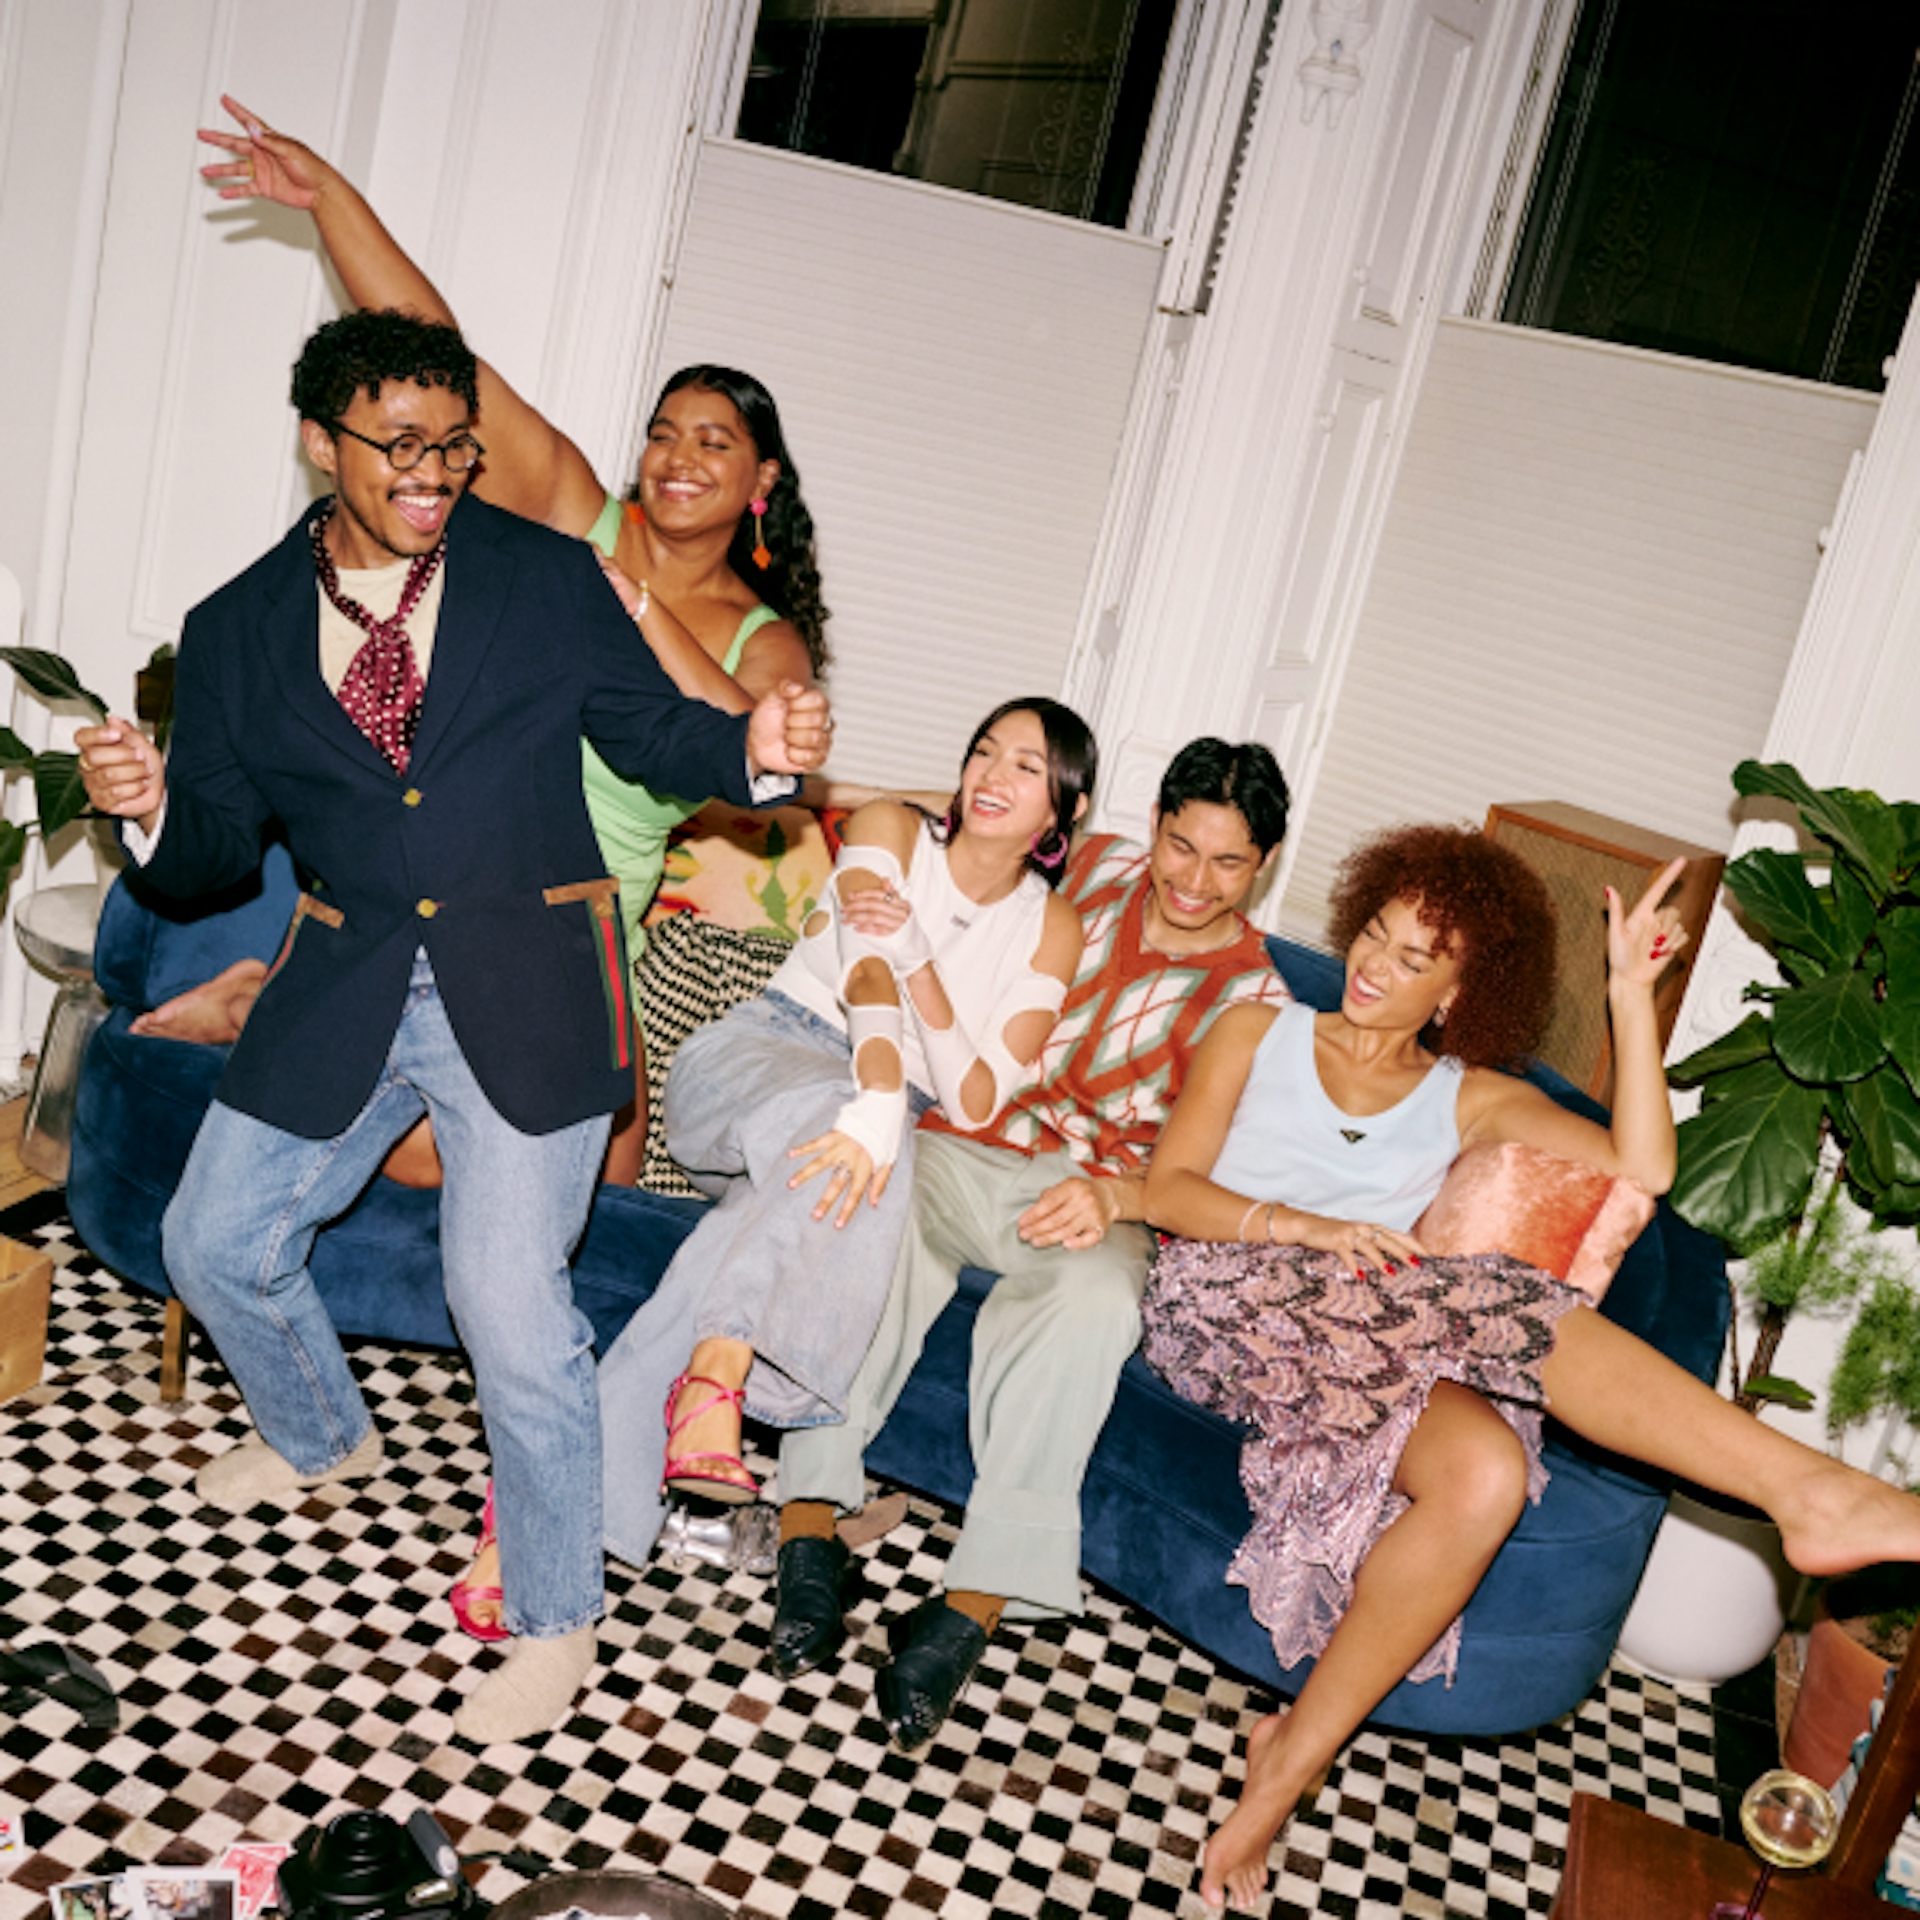 The image depicts five friends enjoying themselves indoors, sitting on a blue couch in a stylish room with white walls and large windows. The floor features a black and white checkered pattern. The group appears joyful, with some dancing and others laughing, dressed in colorful and trendy outfits. The room is decorated with plants and has a casual, lived-in feel.